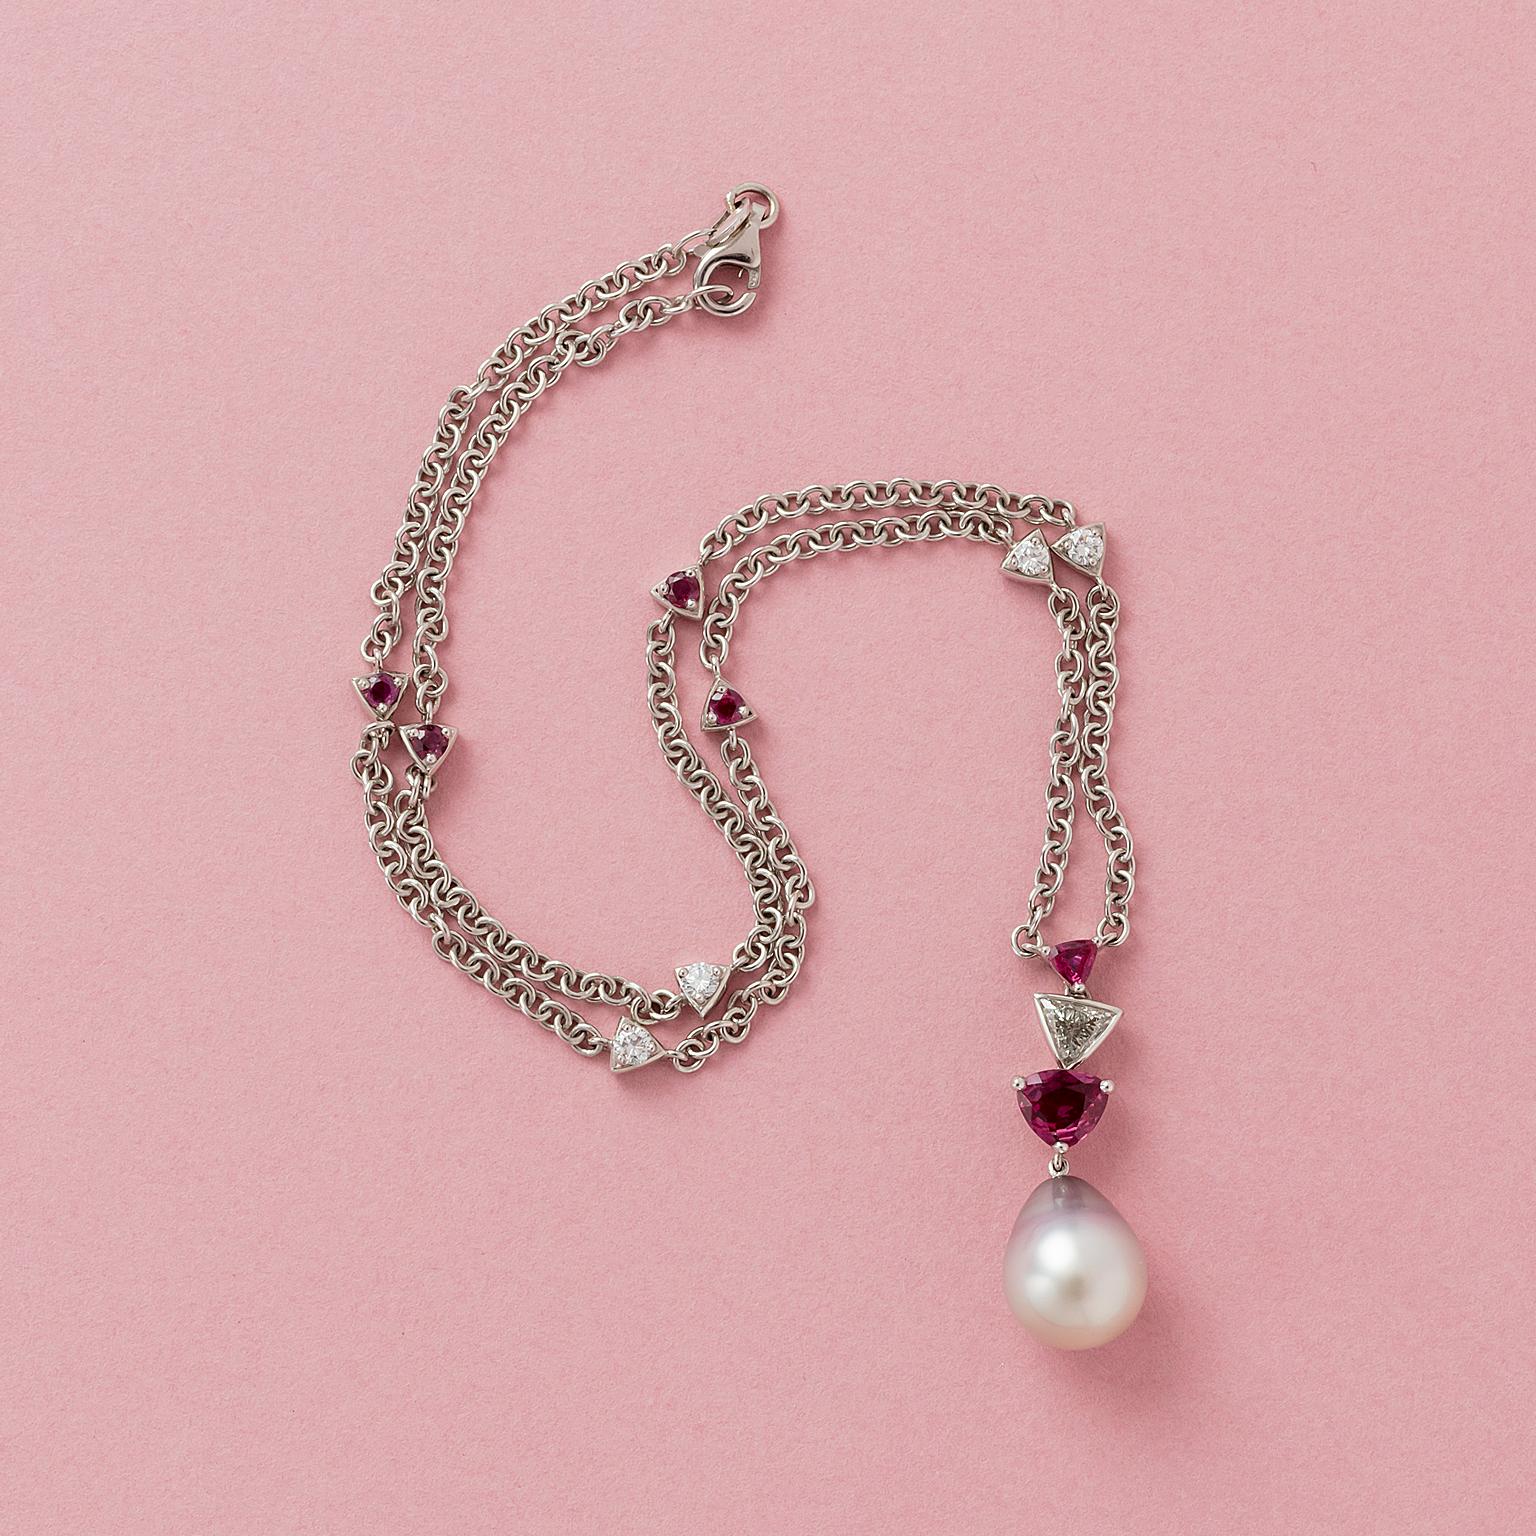 An 18 carat white gold chain and pendant with a light grey Tahiti pearl above which a trilliant cut ruby (1.05 carat) and a trilliant cut diamond (0.4 carat I, P) and a trilliant cut ruby (0.9 carat) on a white gold chain that is decorated with four